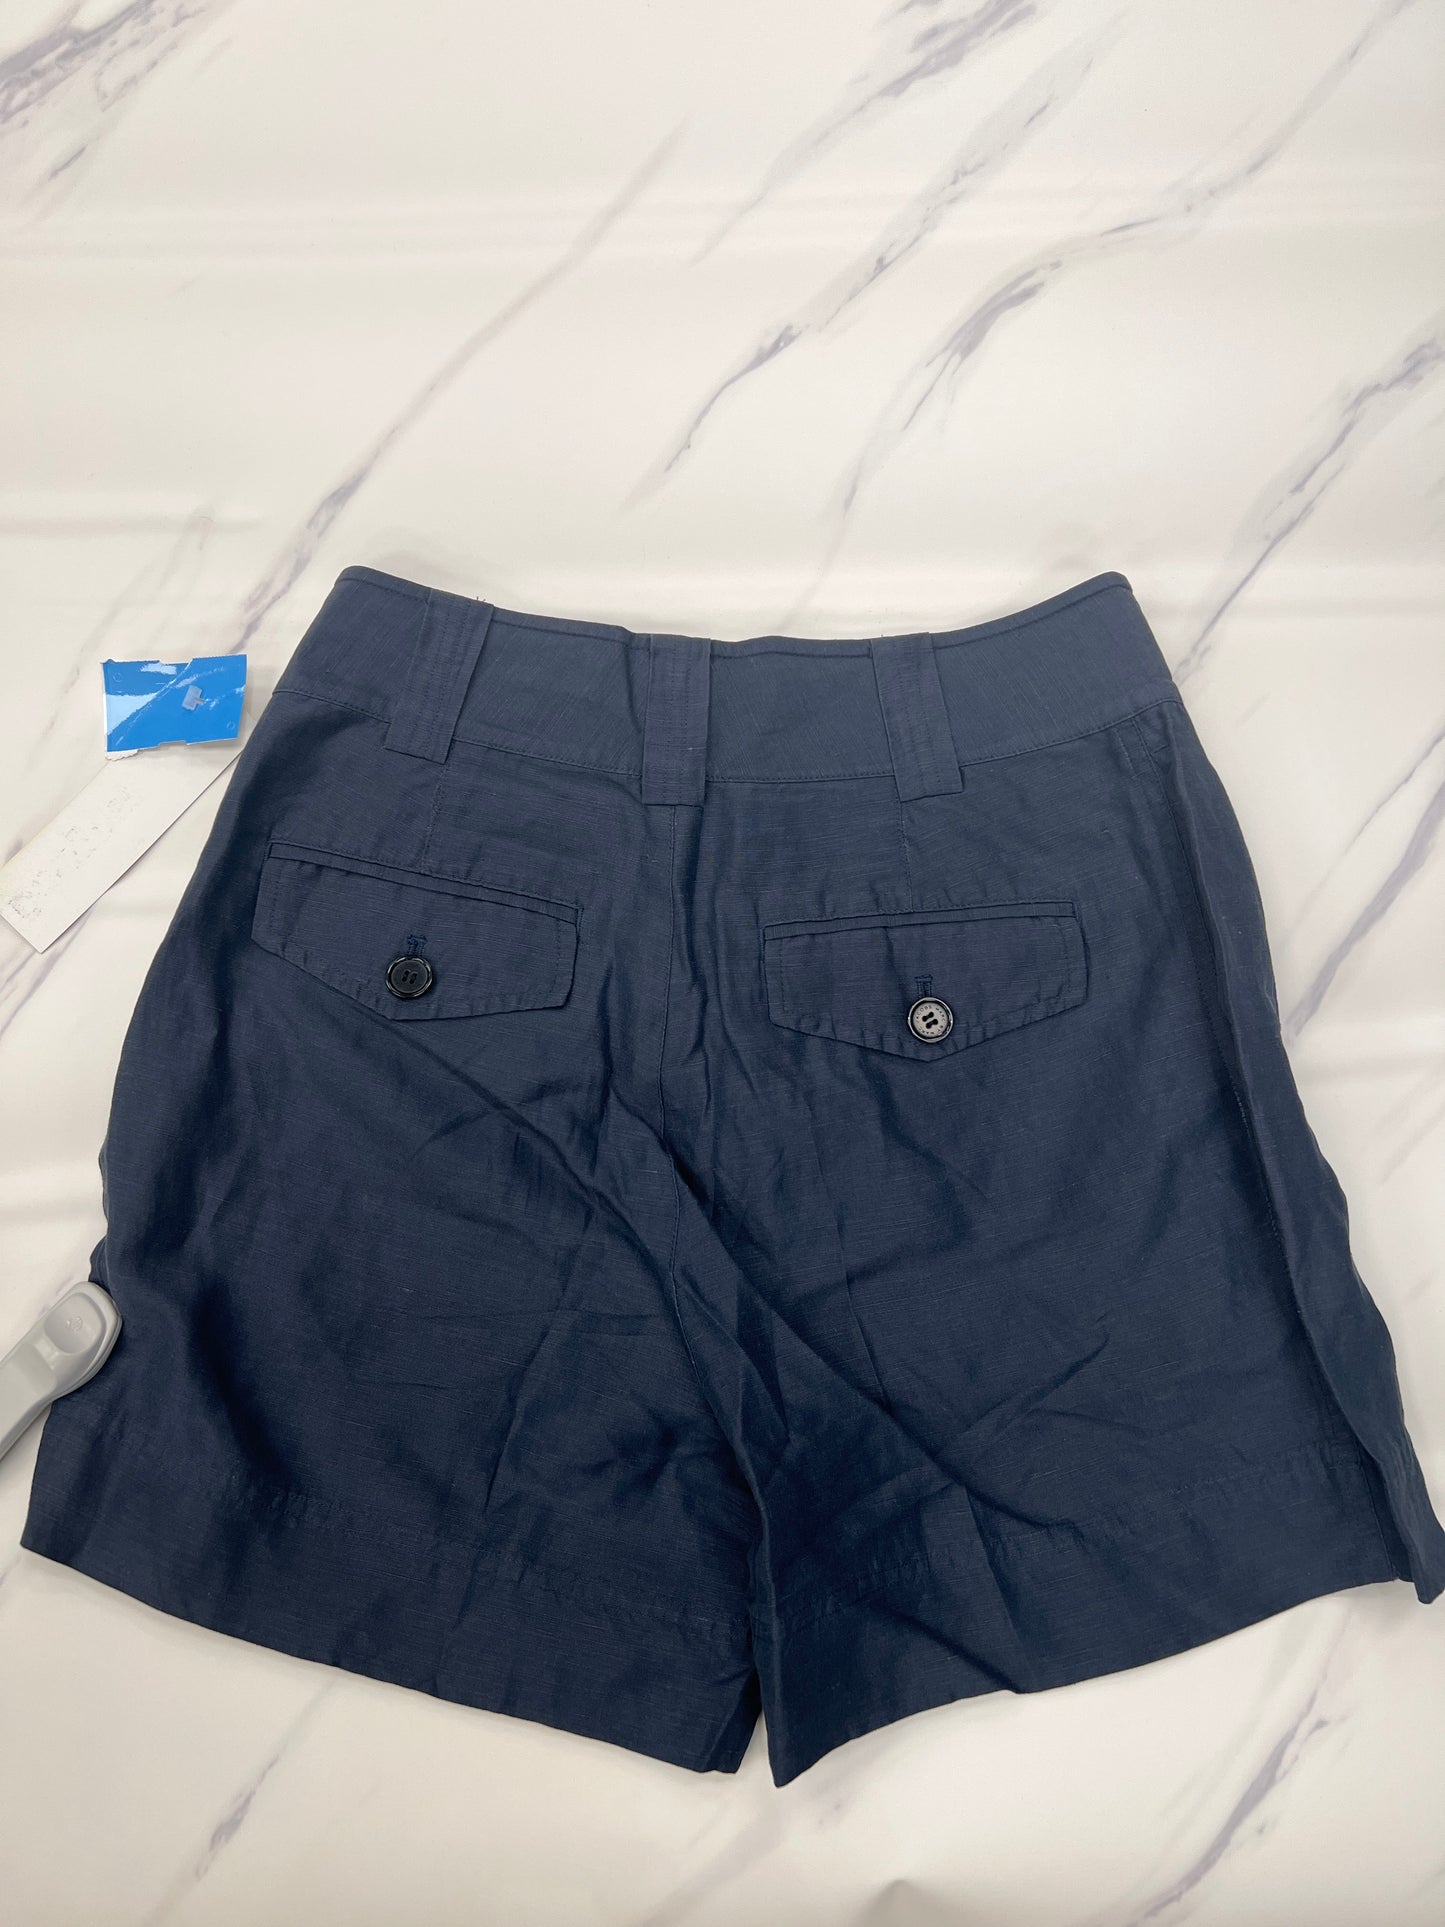 Shorts By Marc By Marc Jacobs  Size: 2